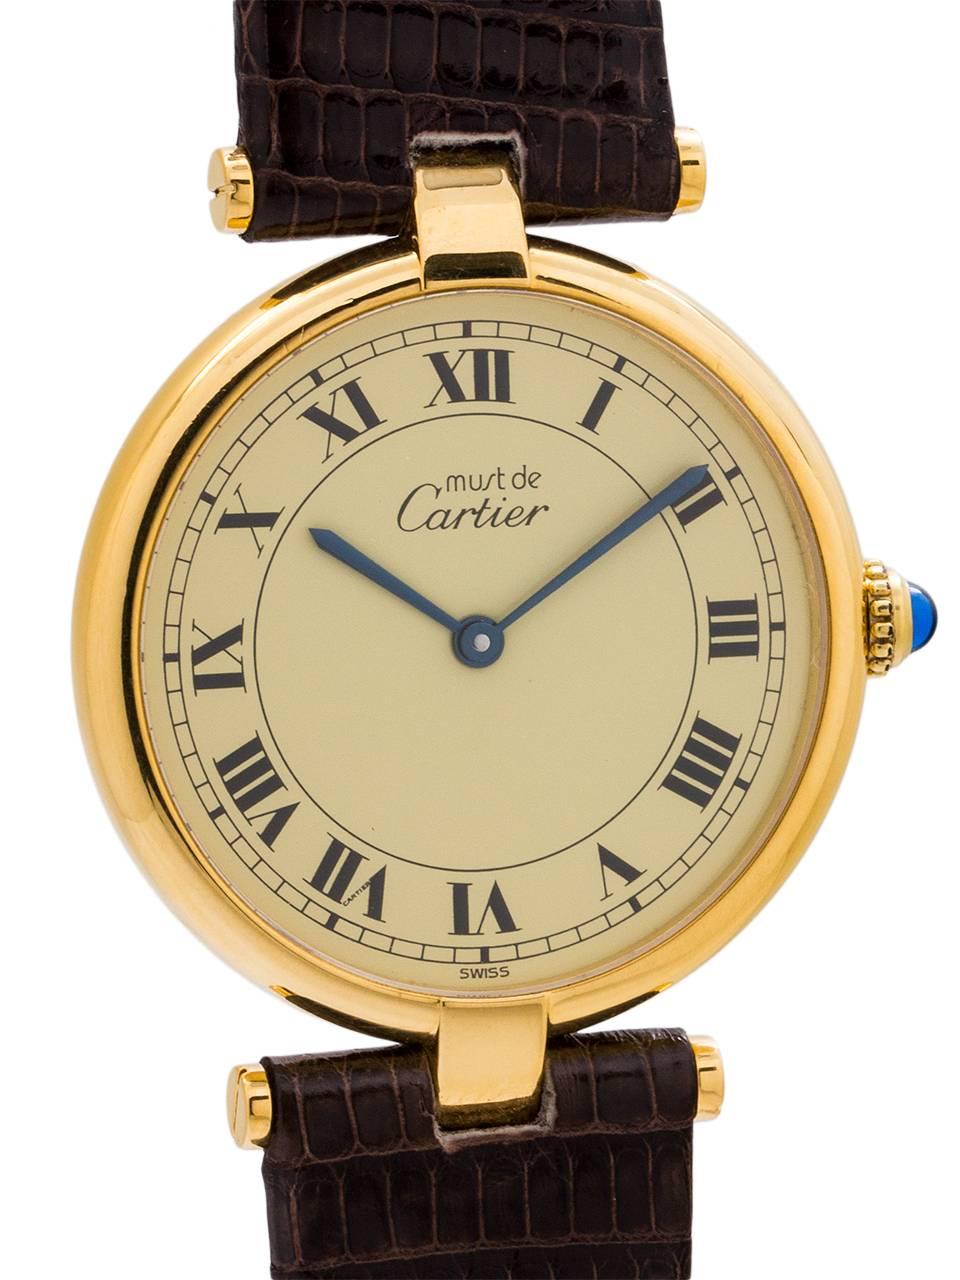 
Cartier man’s vermeil Vendome Tank wristwatch circa 1990s. Case measuring 30.5 x 37mm with T-bar lugs. Featuring an original cream dial with classic printed Cartier Roman numbers with blued steel hands and blue sapphire cabochon crown. Battery